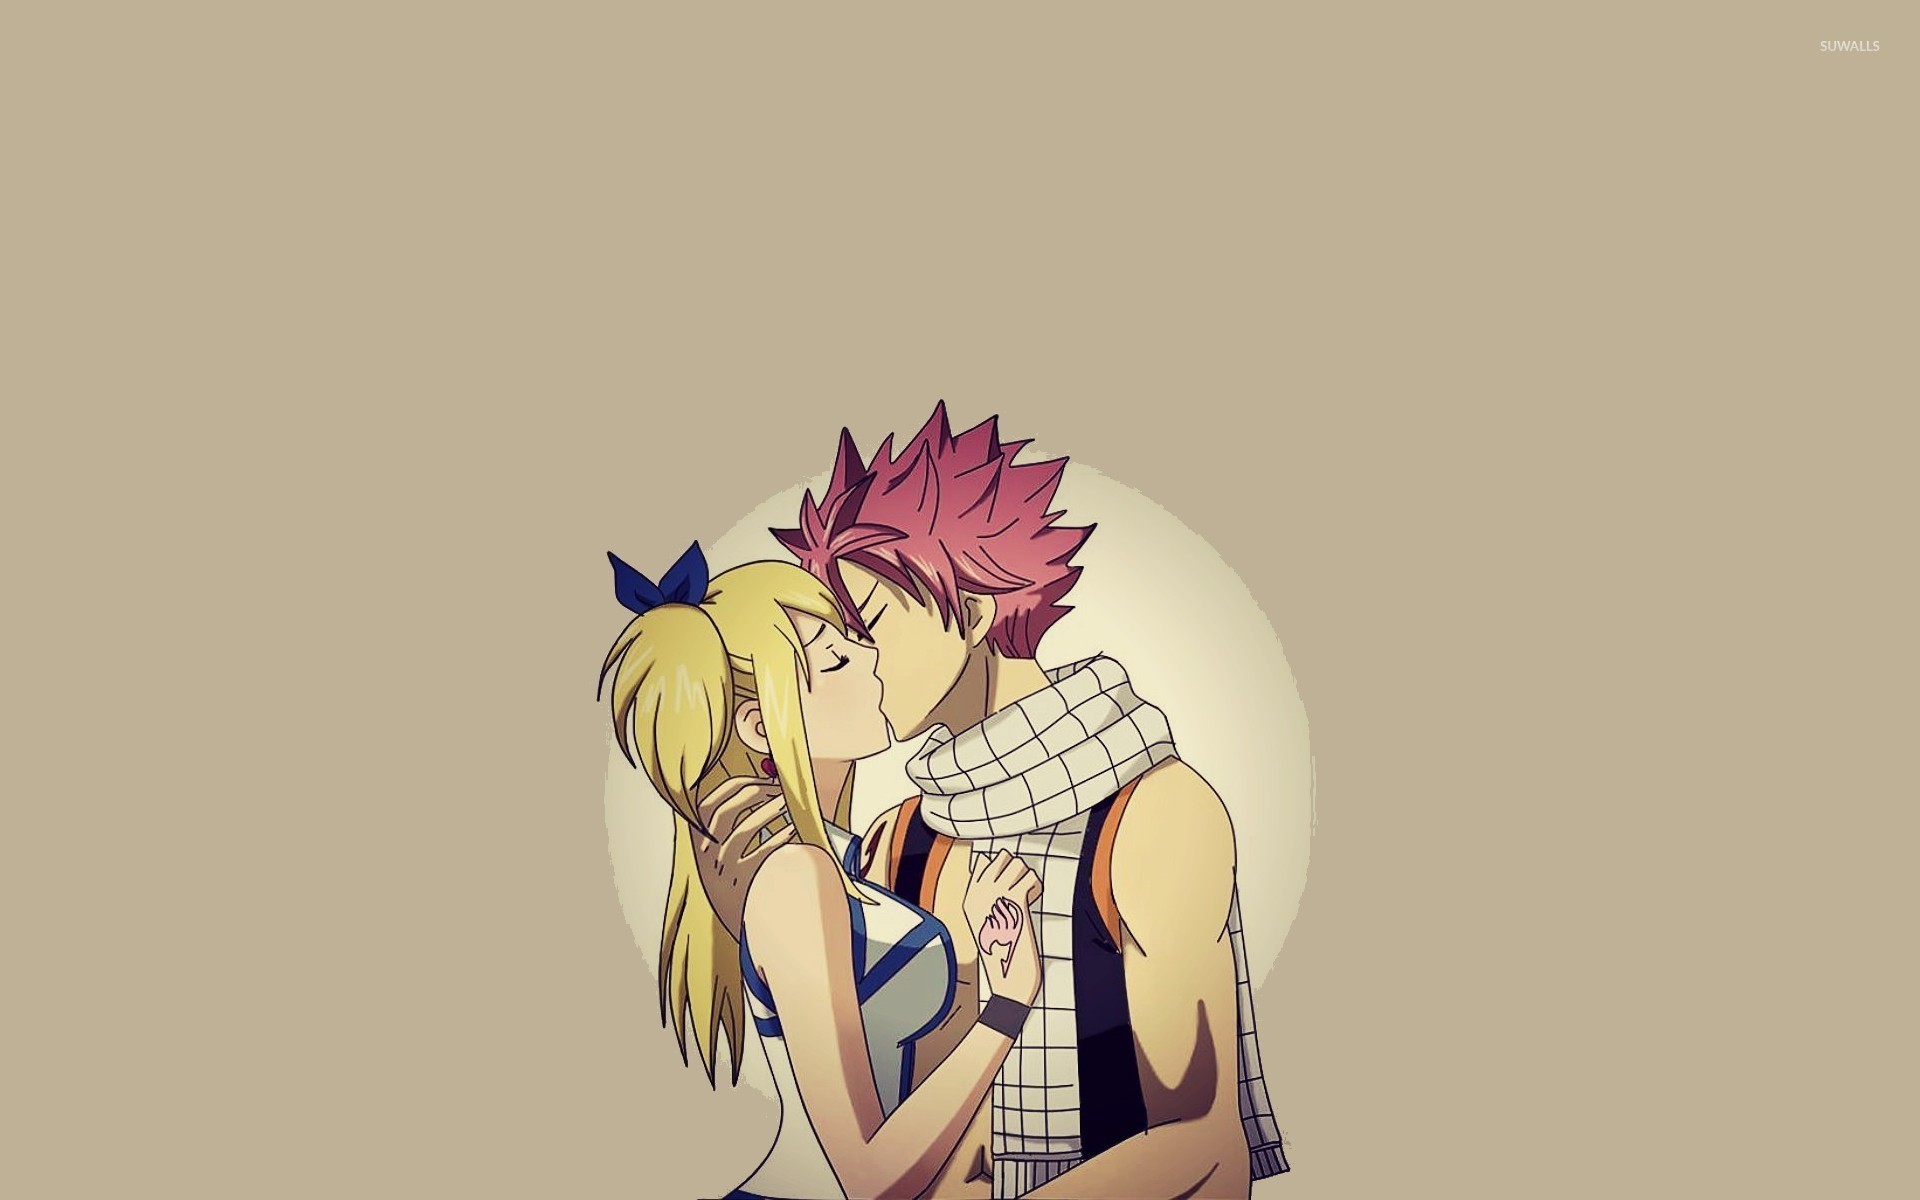 1920x1200  Lucy and Natsu - Fairy Tail wallpaper  jpg